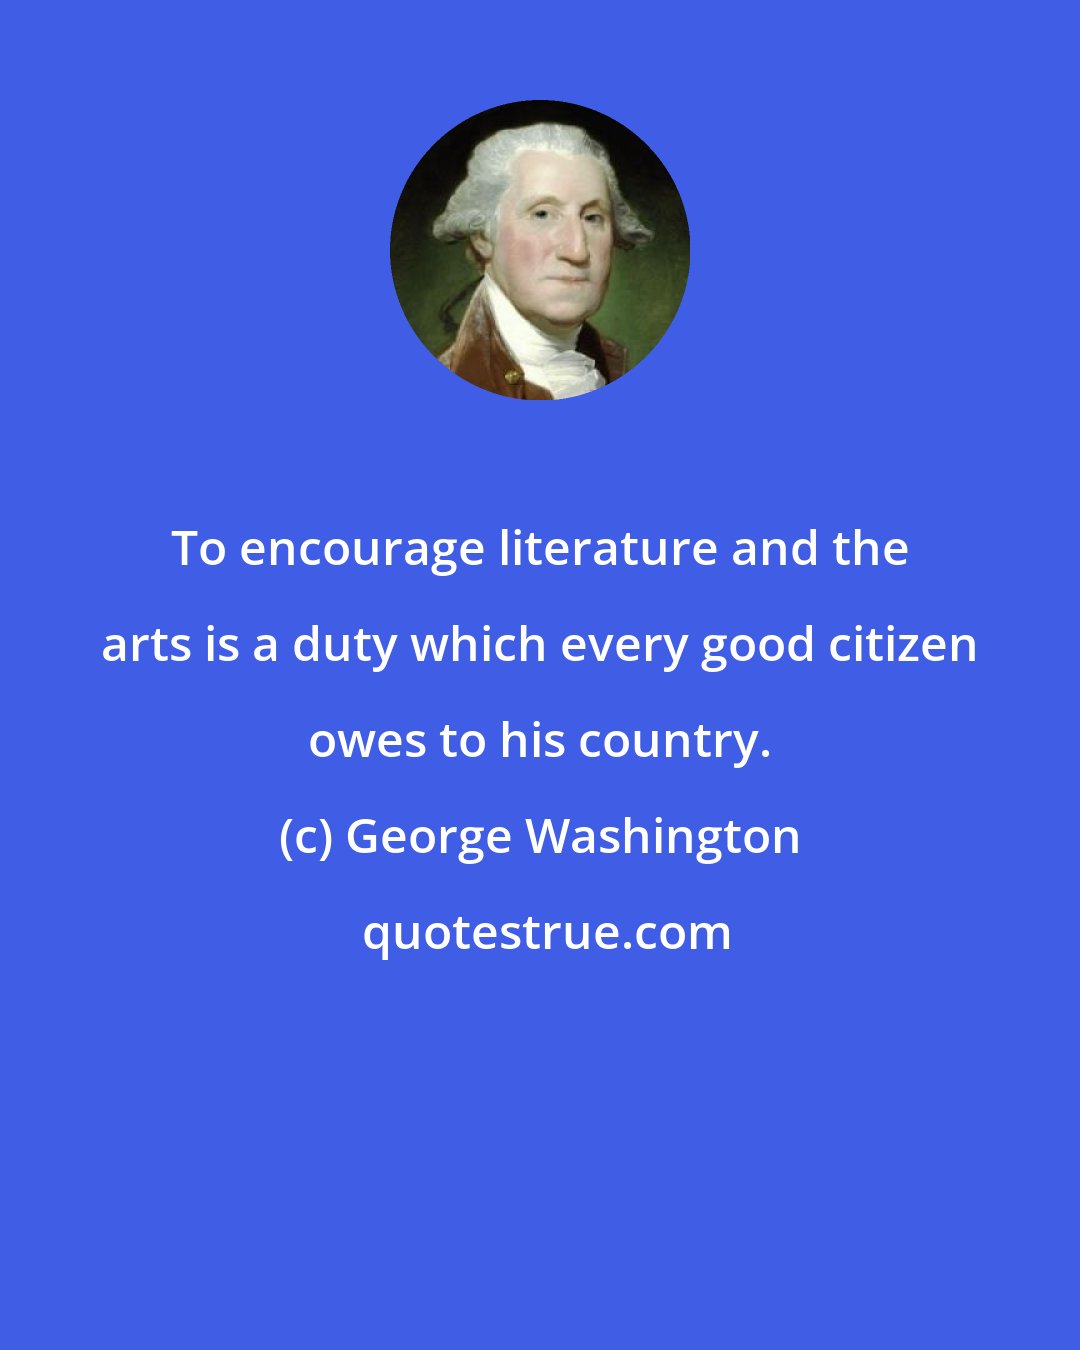 George Washington: To encourage literature and the arts is a duty which every good citizen owes to his country.